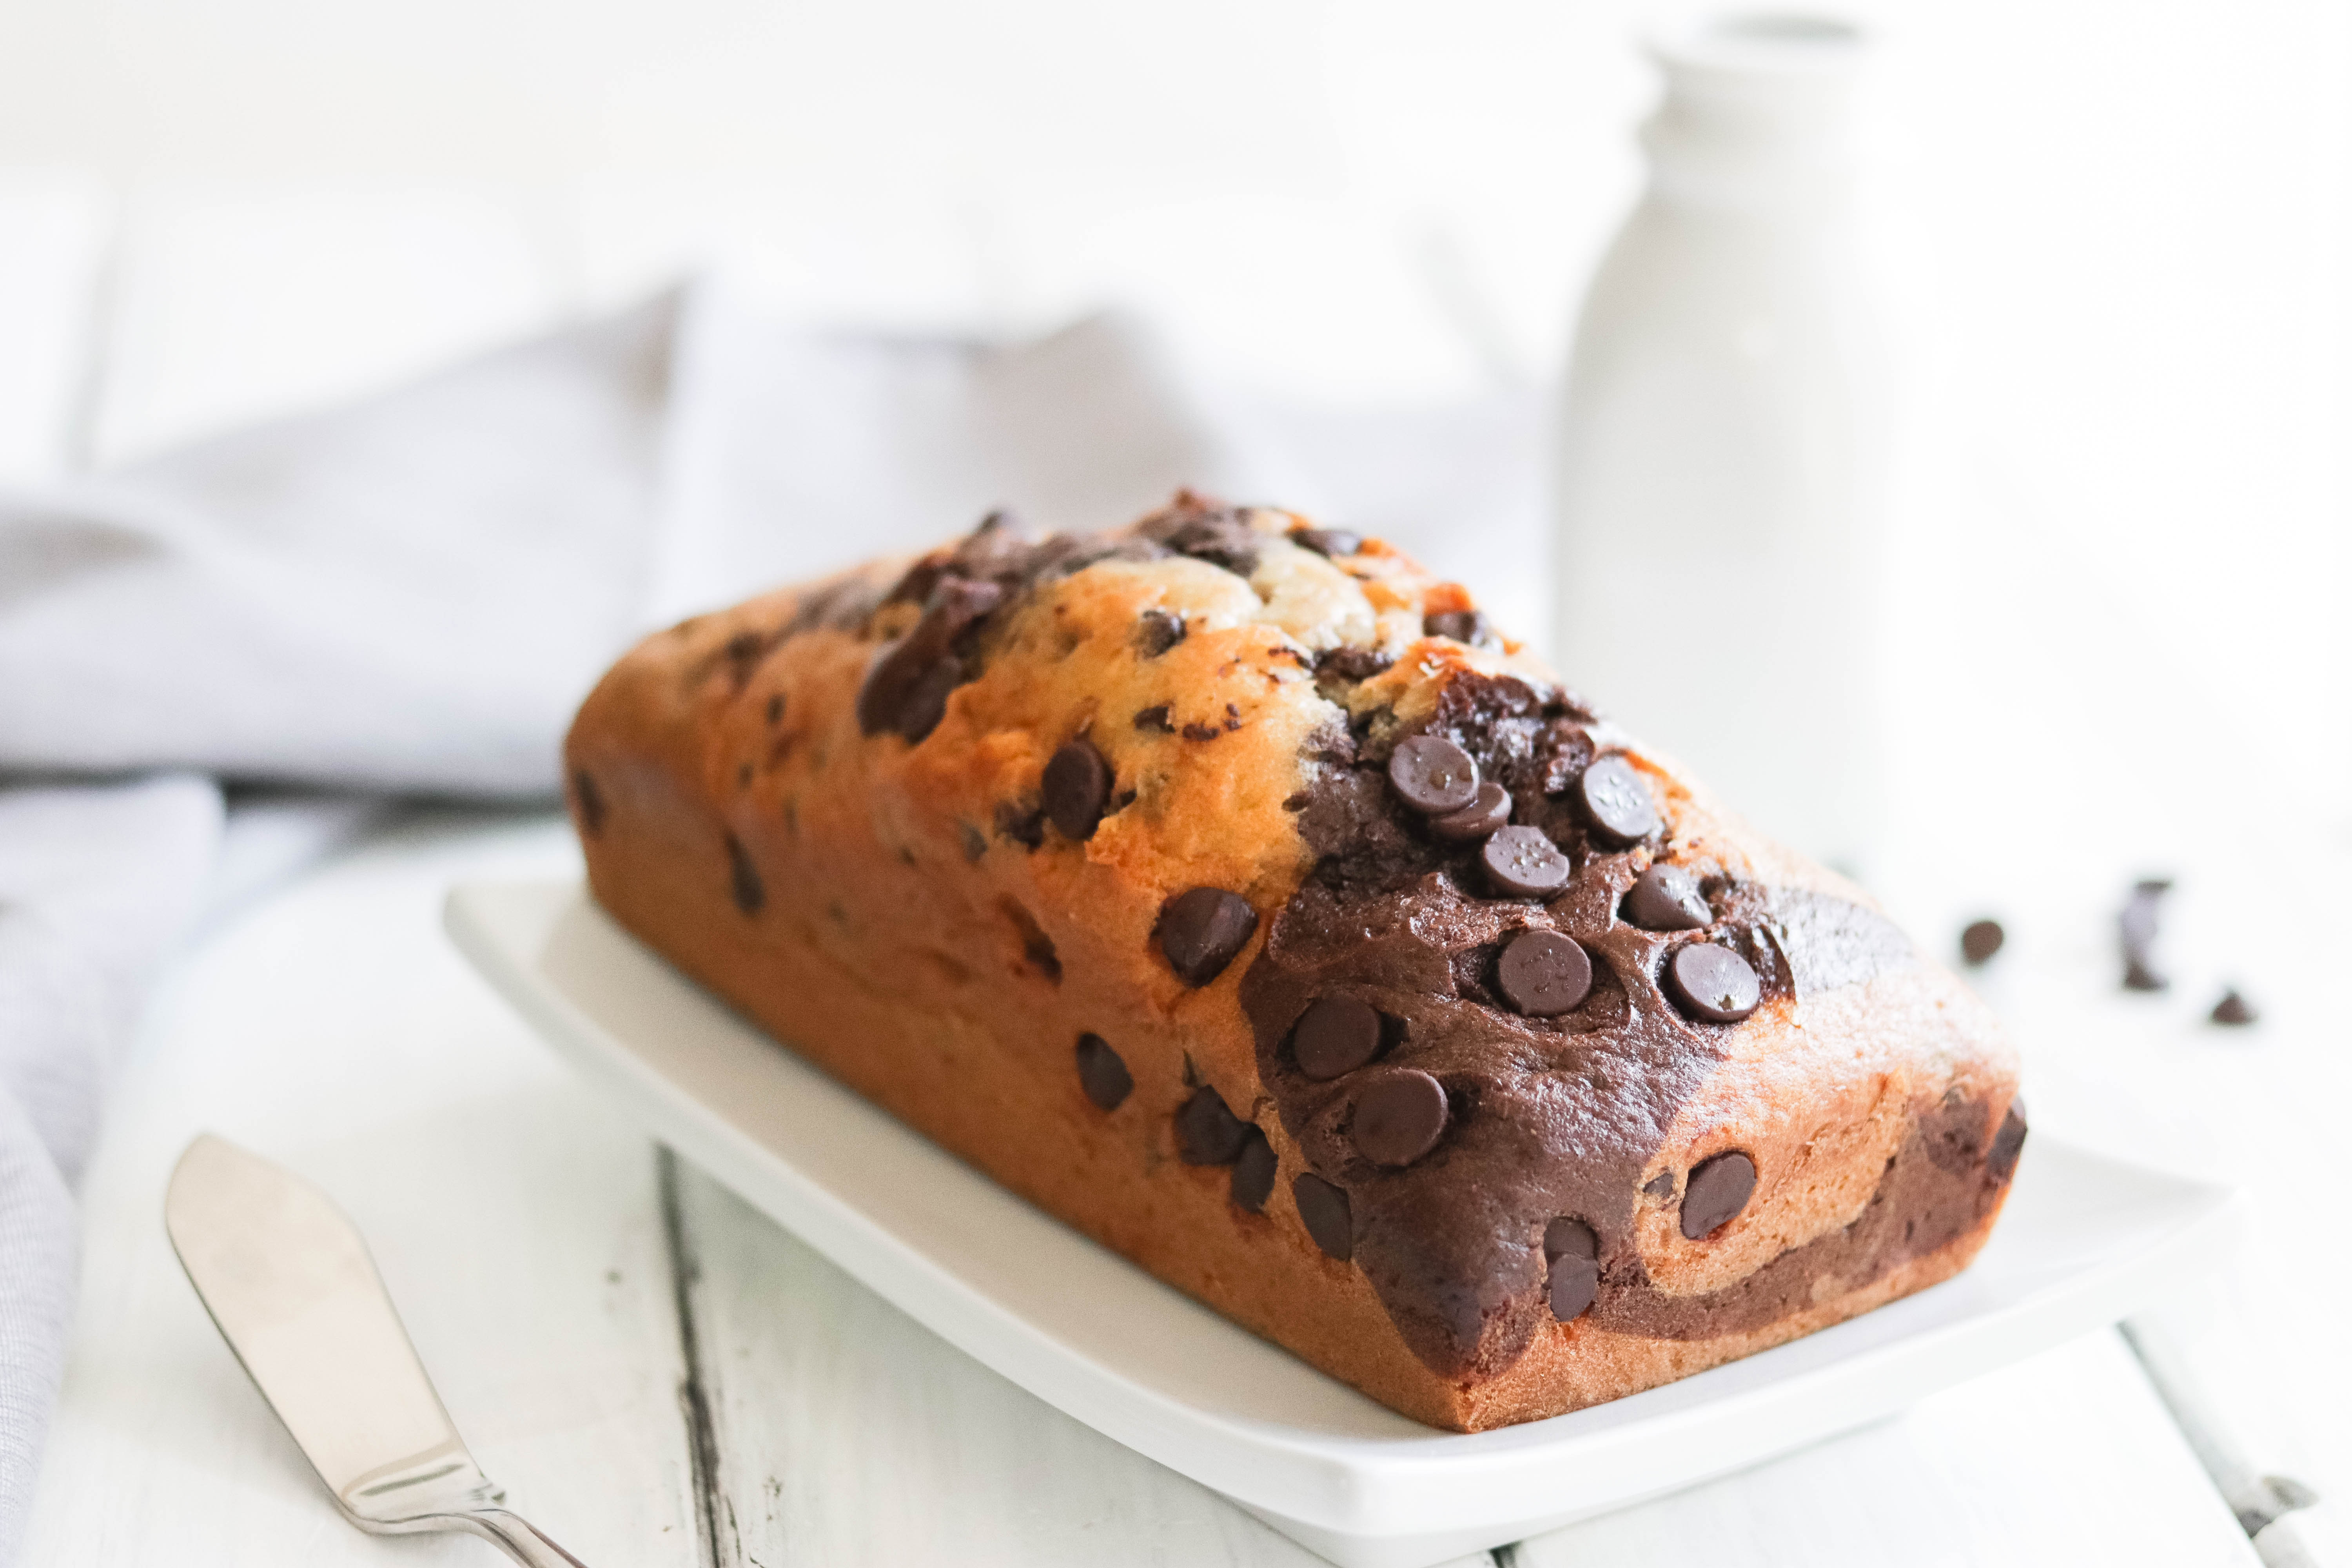 Quick and easy vegan chocolate swirl banana bread. Gluten free and dairy free. Health alternative to a sweet treat! Bake fresh or freeze dough for later use. Enjoy every moist soft chocolatey bite! #chocolatebananabread #vegan #glutenfree #bread - Nikki's Plate